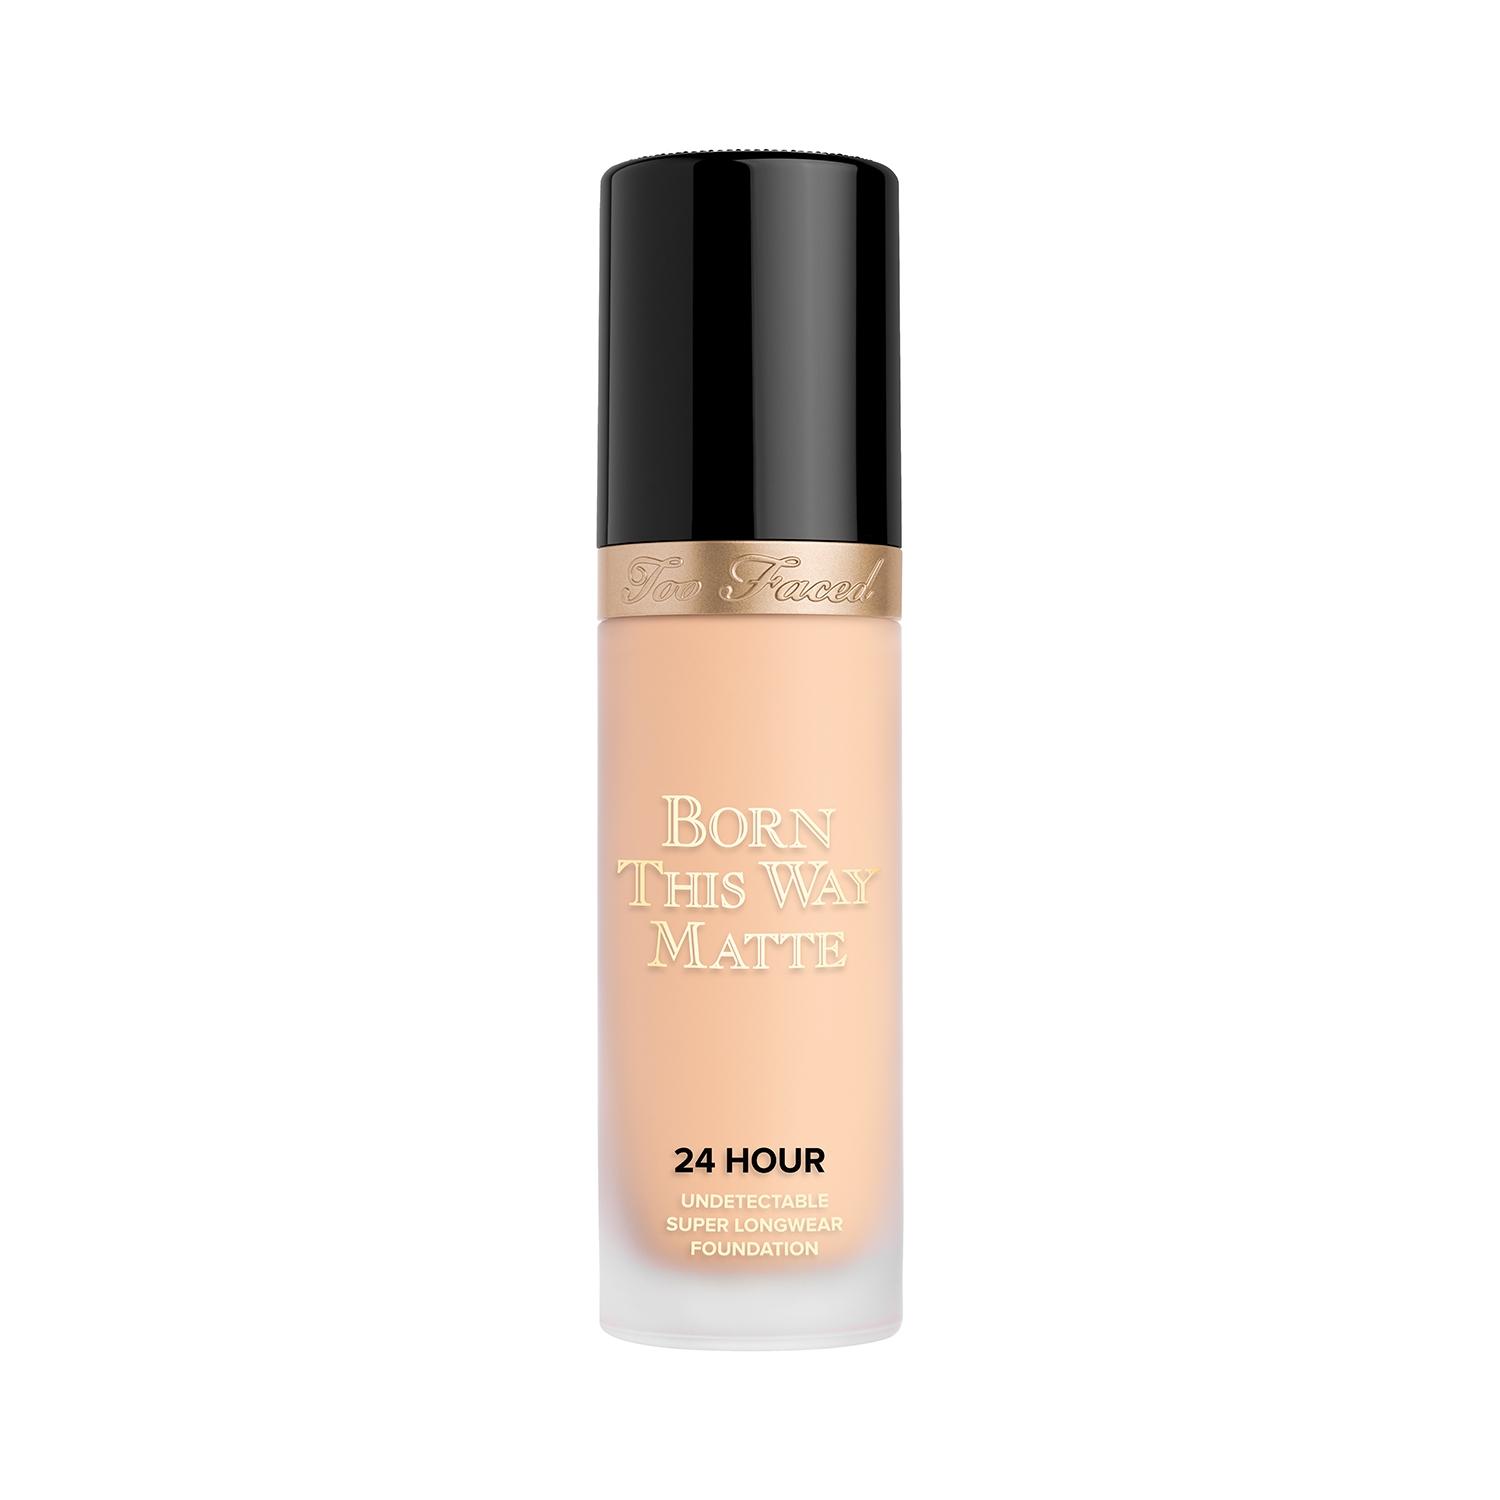 too faced born this way matte foundation - nude (30ml)